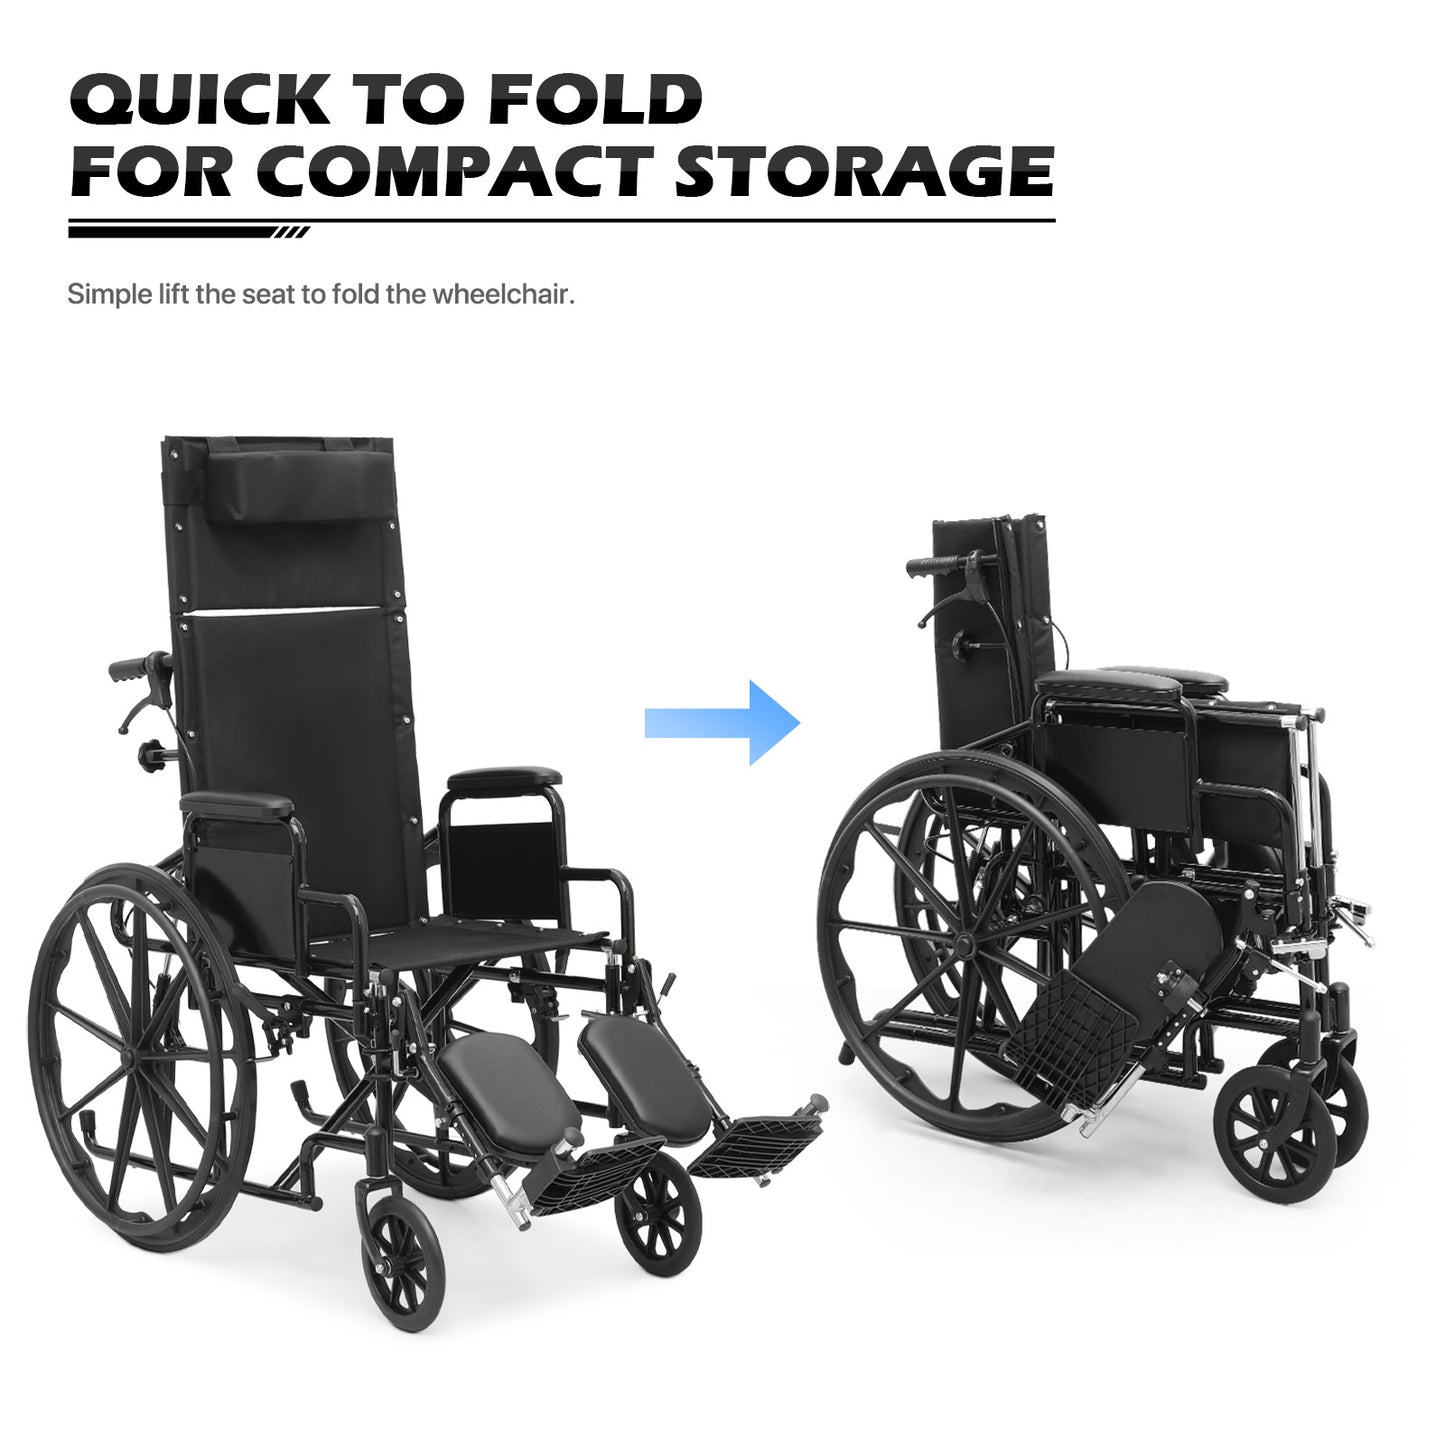 Reclinable Transport Wheelchair - FDA Aproved - 18.5"x16" Seat